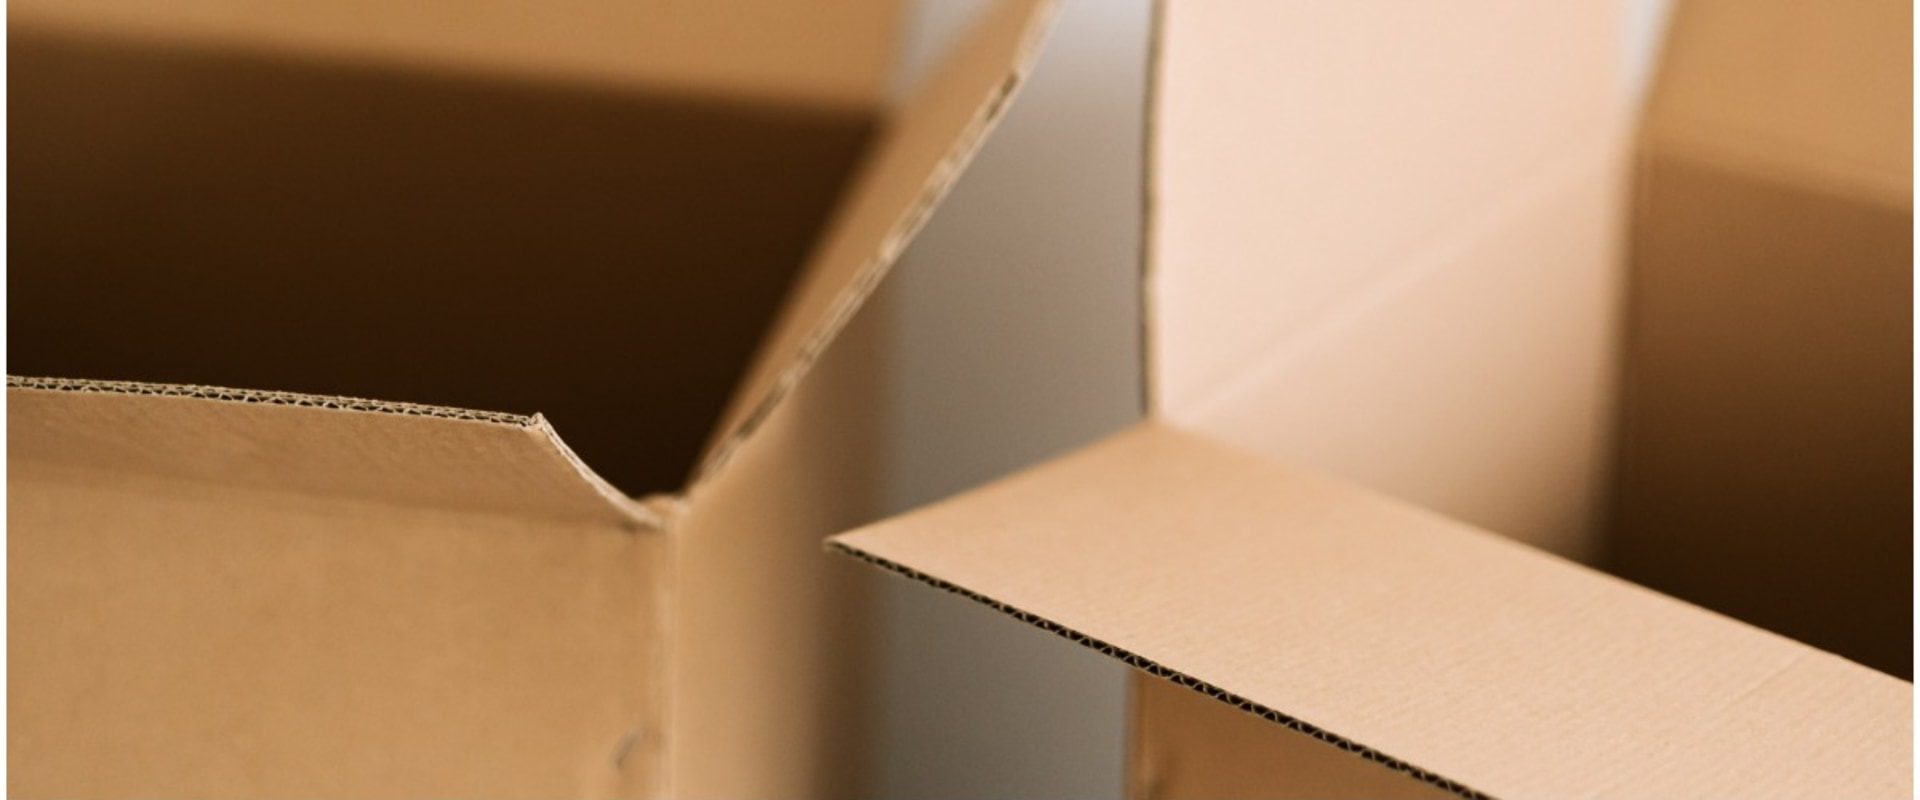 Packing Boxes and Supplies: A Comprehensive Overview